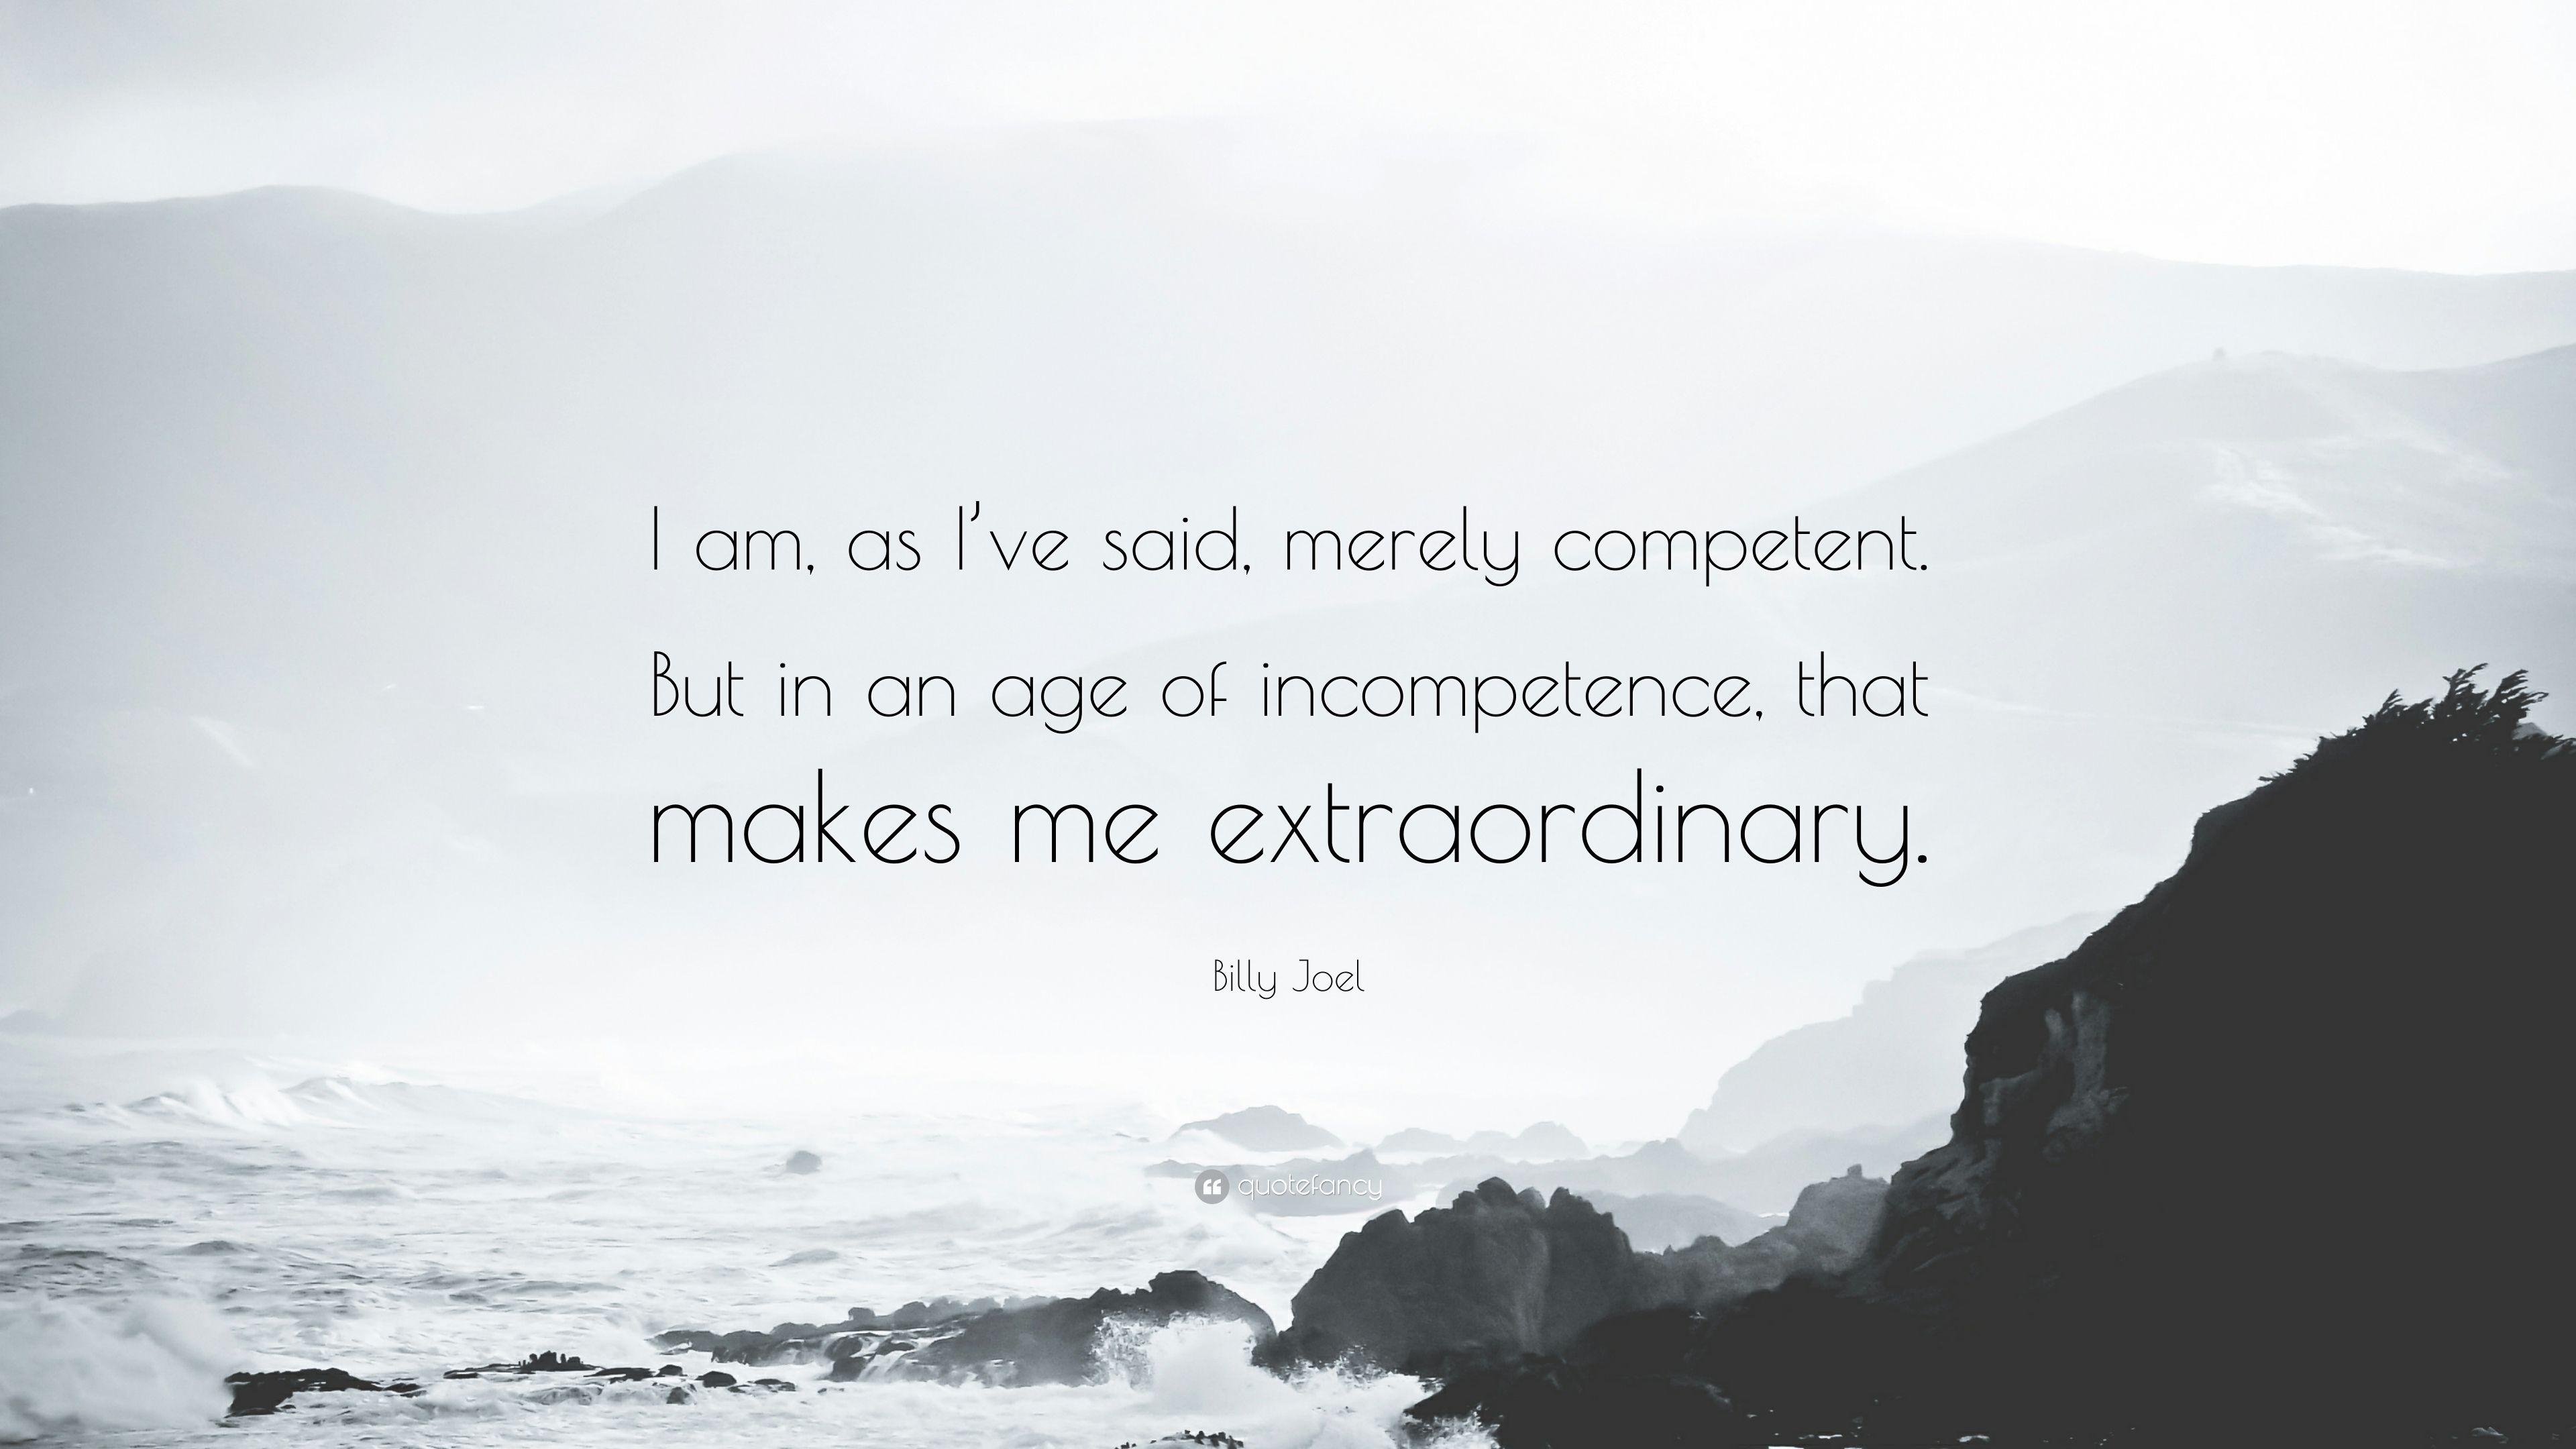 Billy Joel Quote: “I am, as I've said, merely competent. But in an